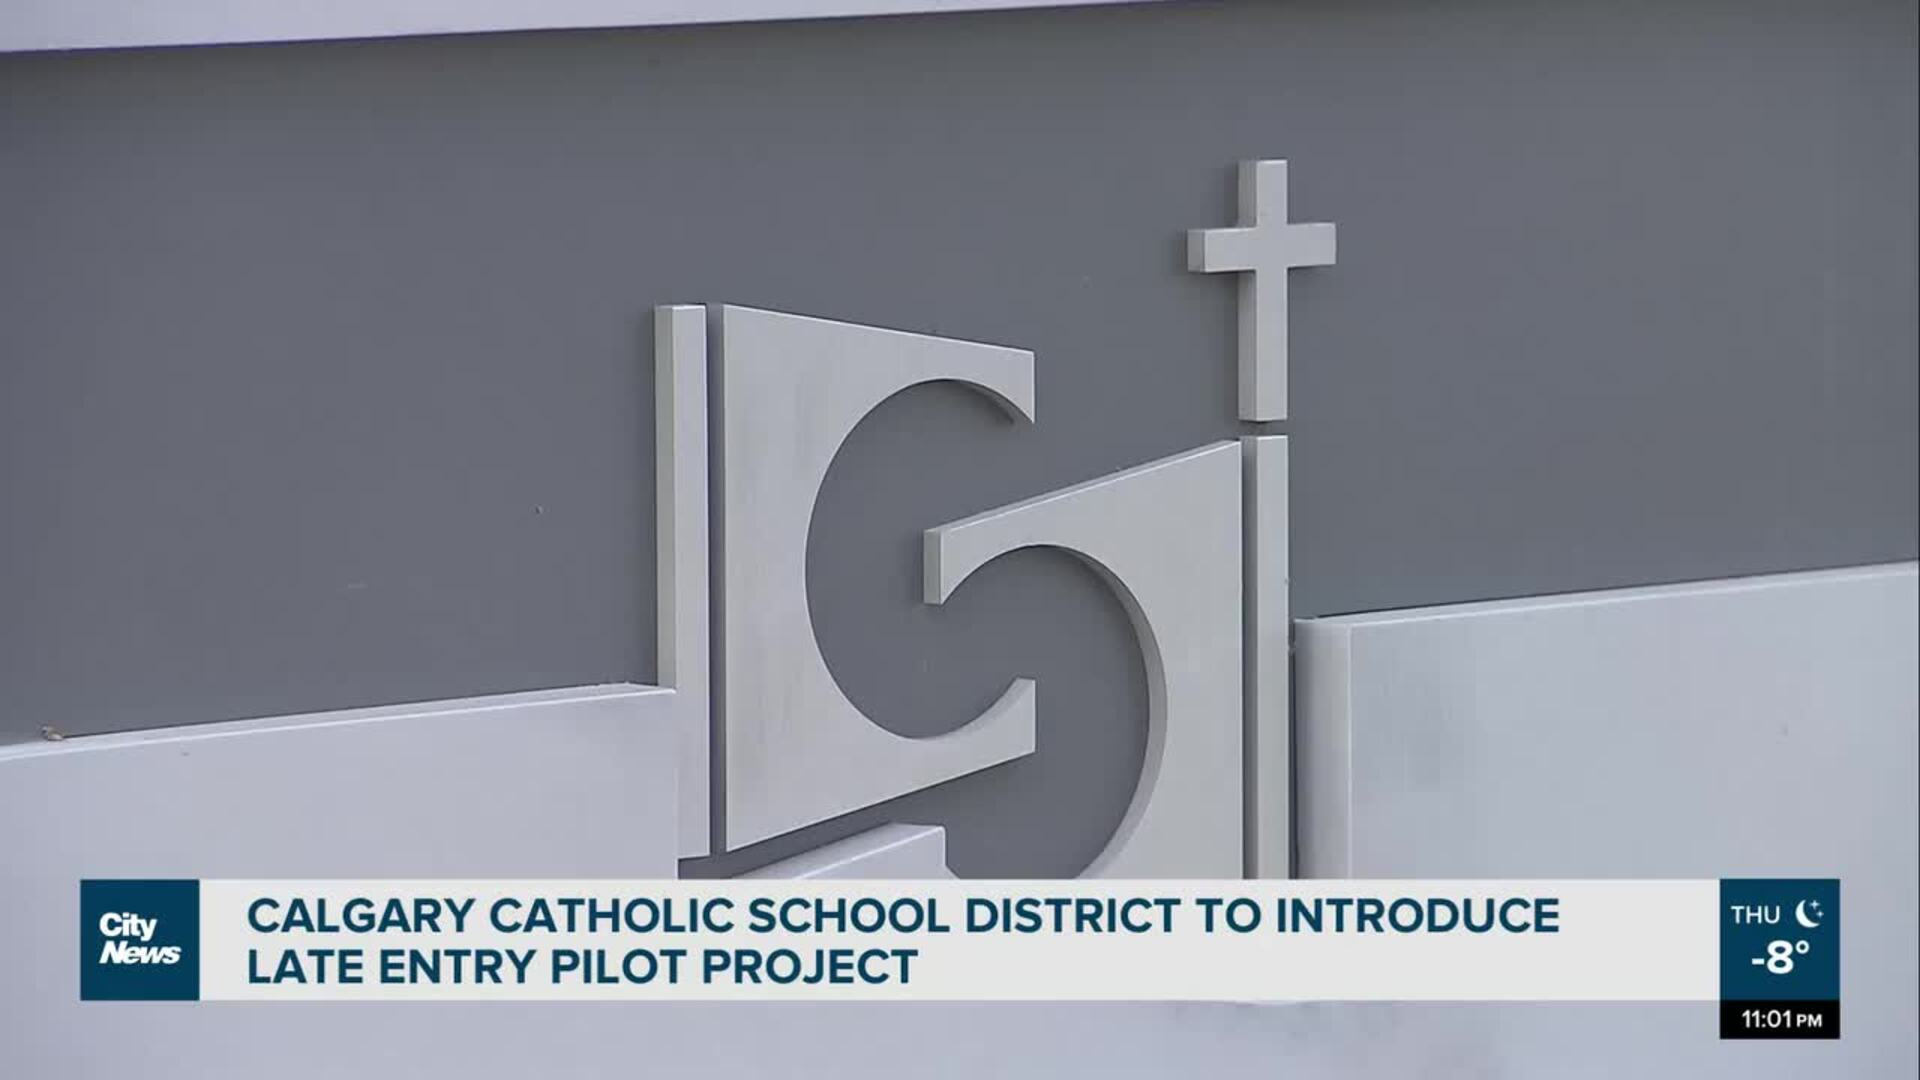 Calgary Catholic School District to introduce late entry pilot project